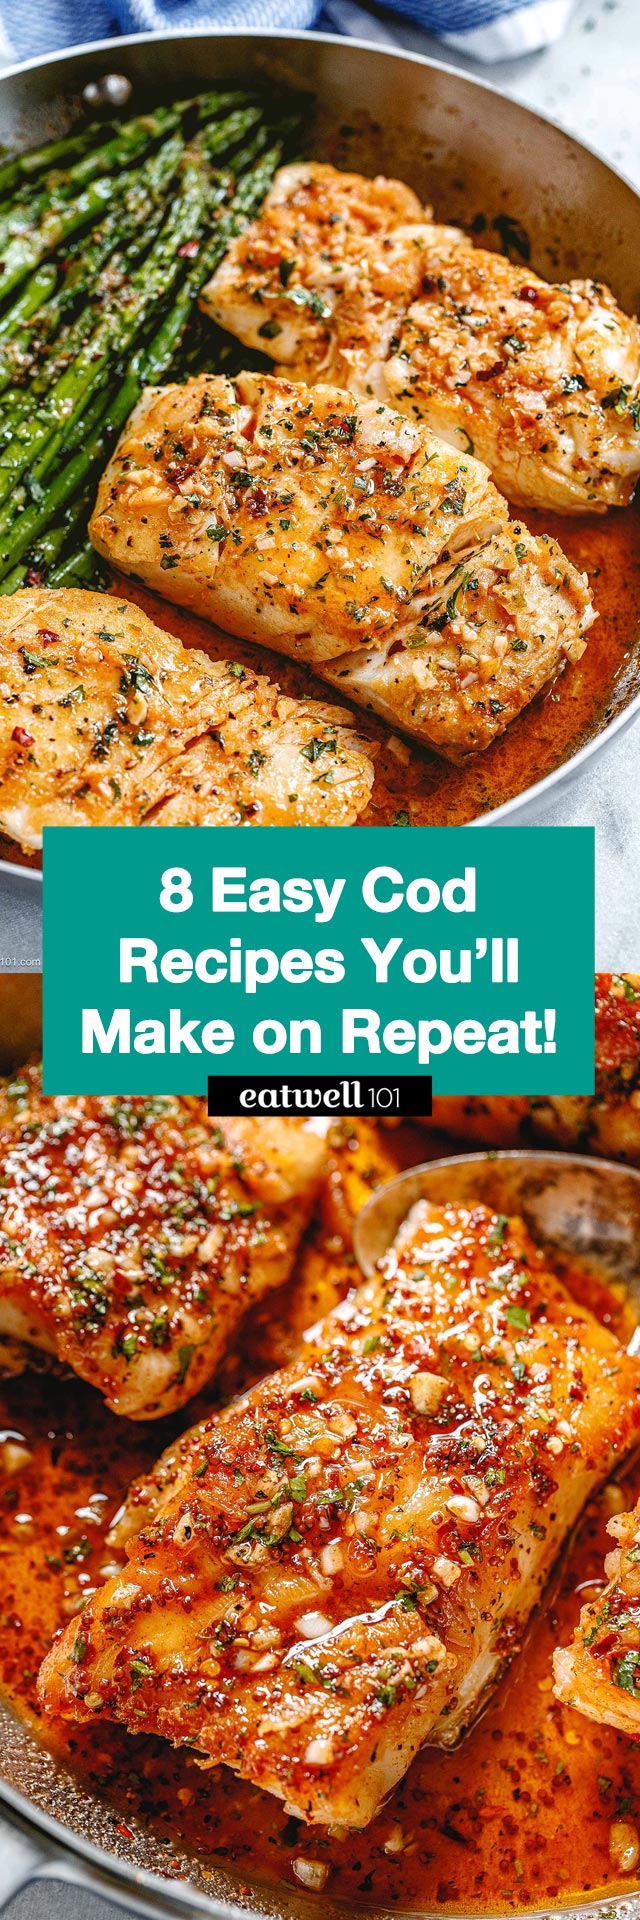 10 Easy Cod Recipes You'll Make on Repeat - #cod #fish #recipes #eatwell101 - These are our best cod recipes for easy, breezy weeknight dinners. From coconut curry cod  to garlic butter cod with lemon asparagus, these cod recipes are easy, delicious, and look impressive!